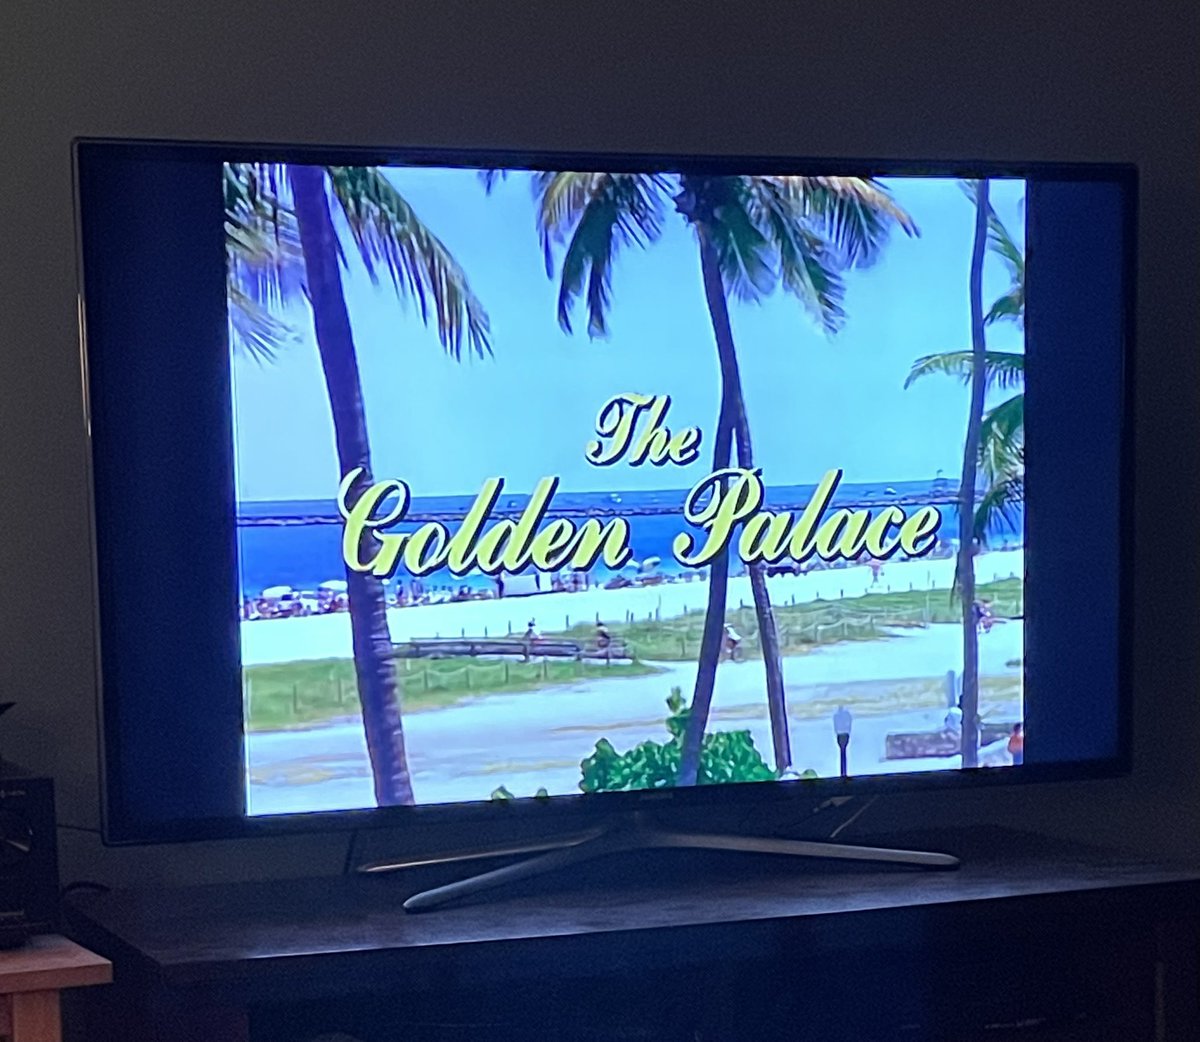 While everyone else is watching sportsball, I’ll be hanging out with Blanche, Rose, Sophia, and Don Cheadle. #GoldenPalace